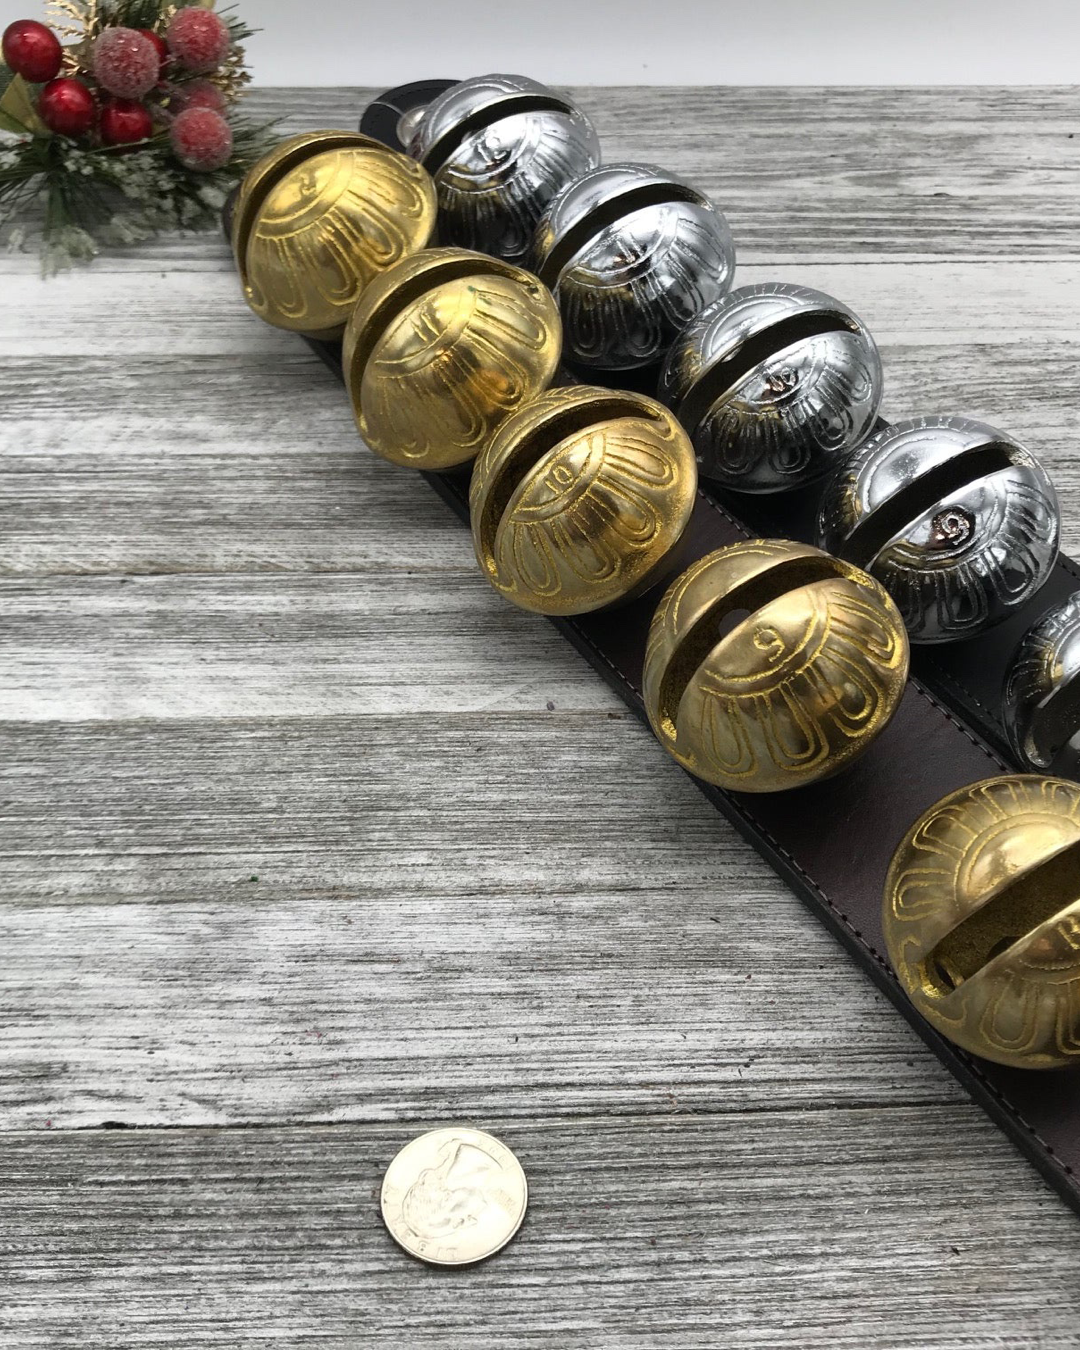 6 Authentic Solid Brass Sleigh Bells, Handmade Leather Sleigh Bells Set, Made In USA